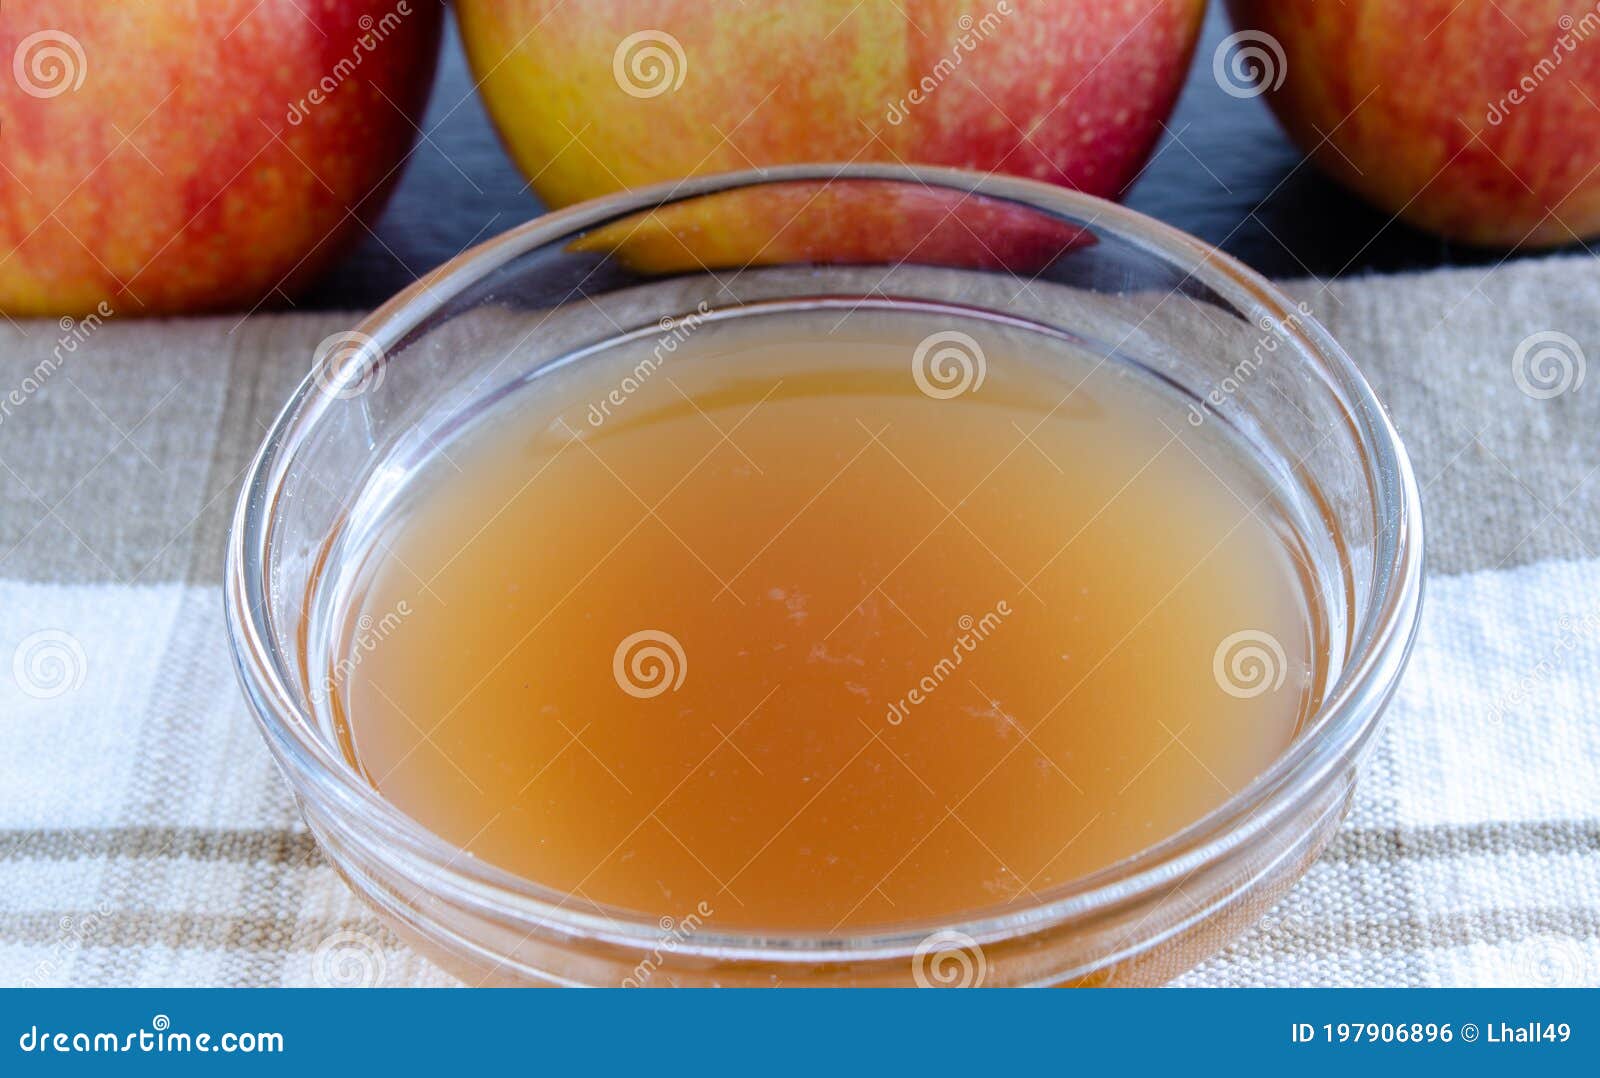 what is the mother in apple cider vinegar